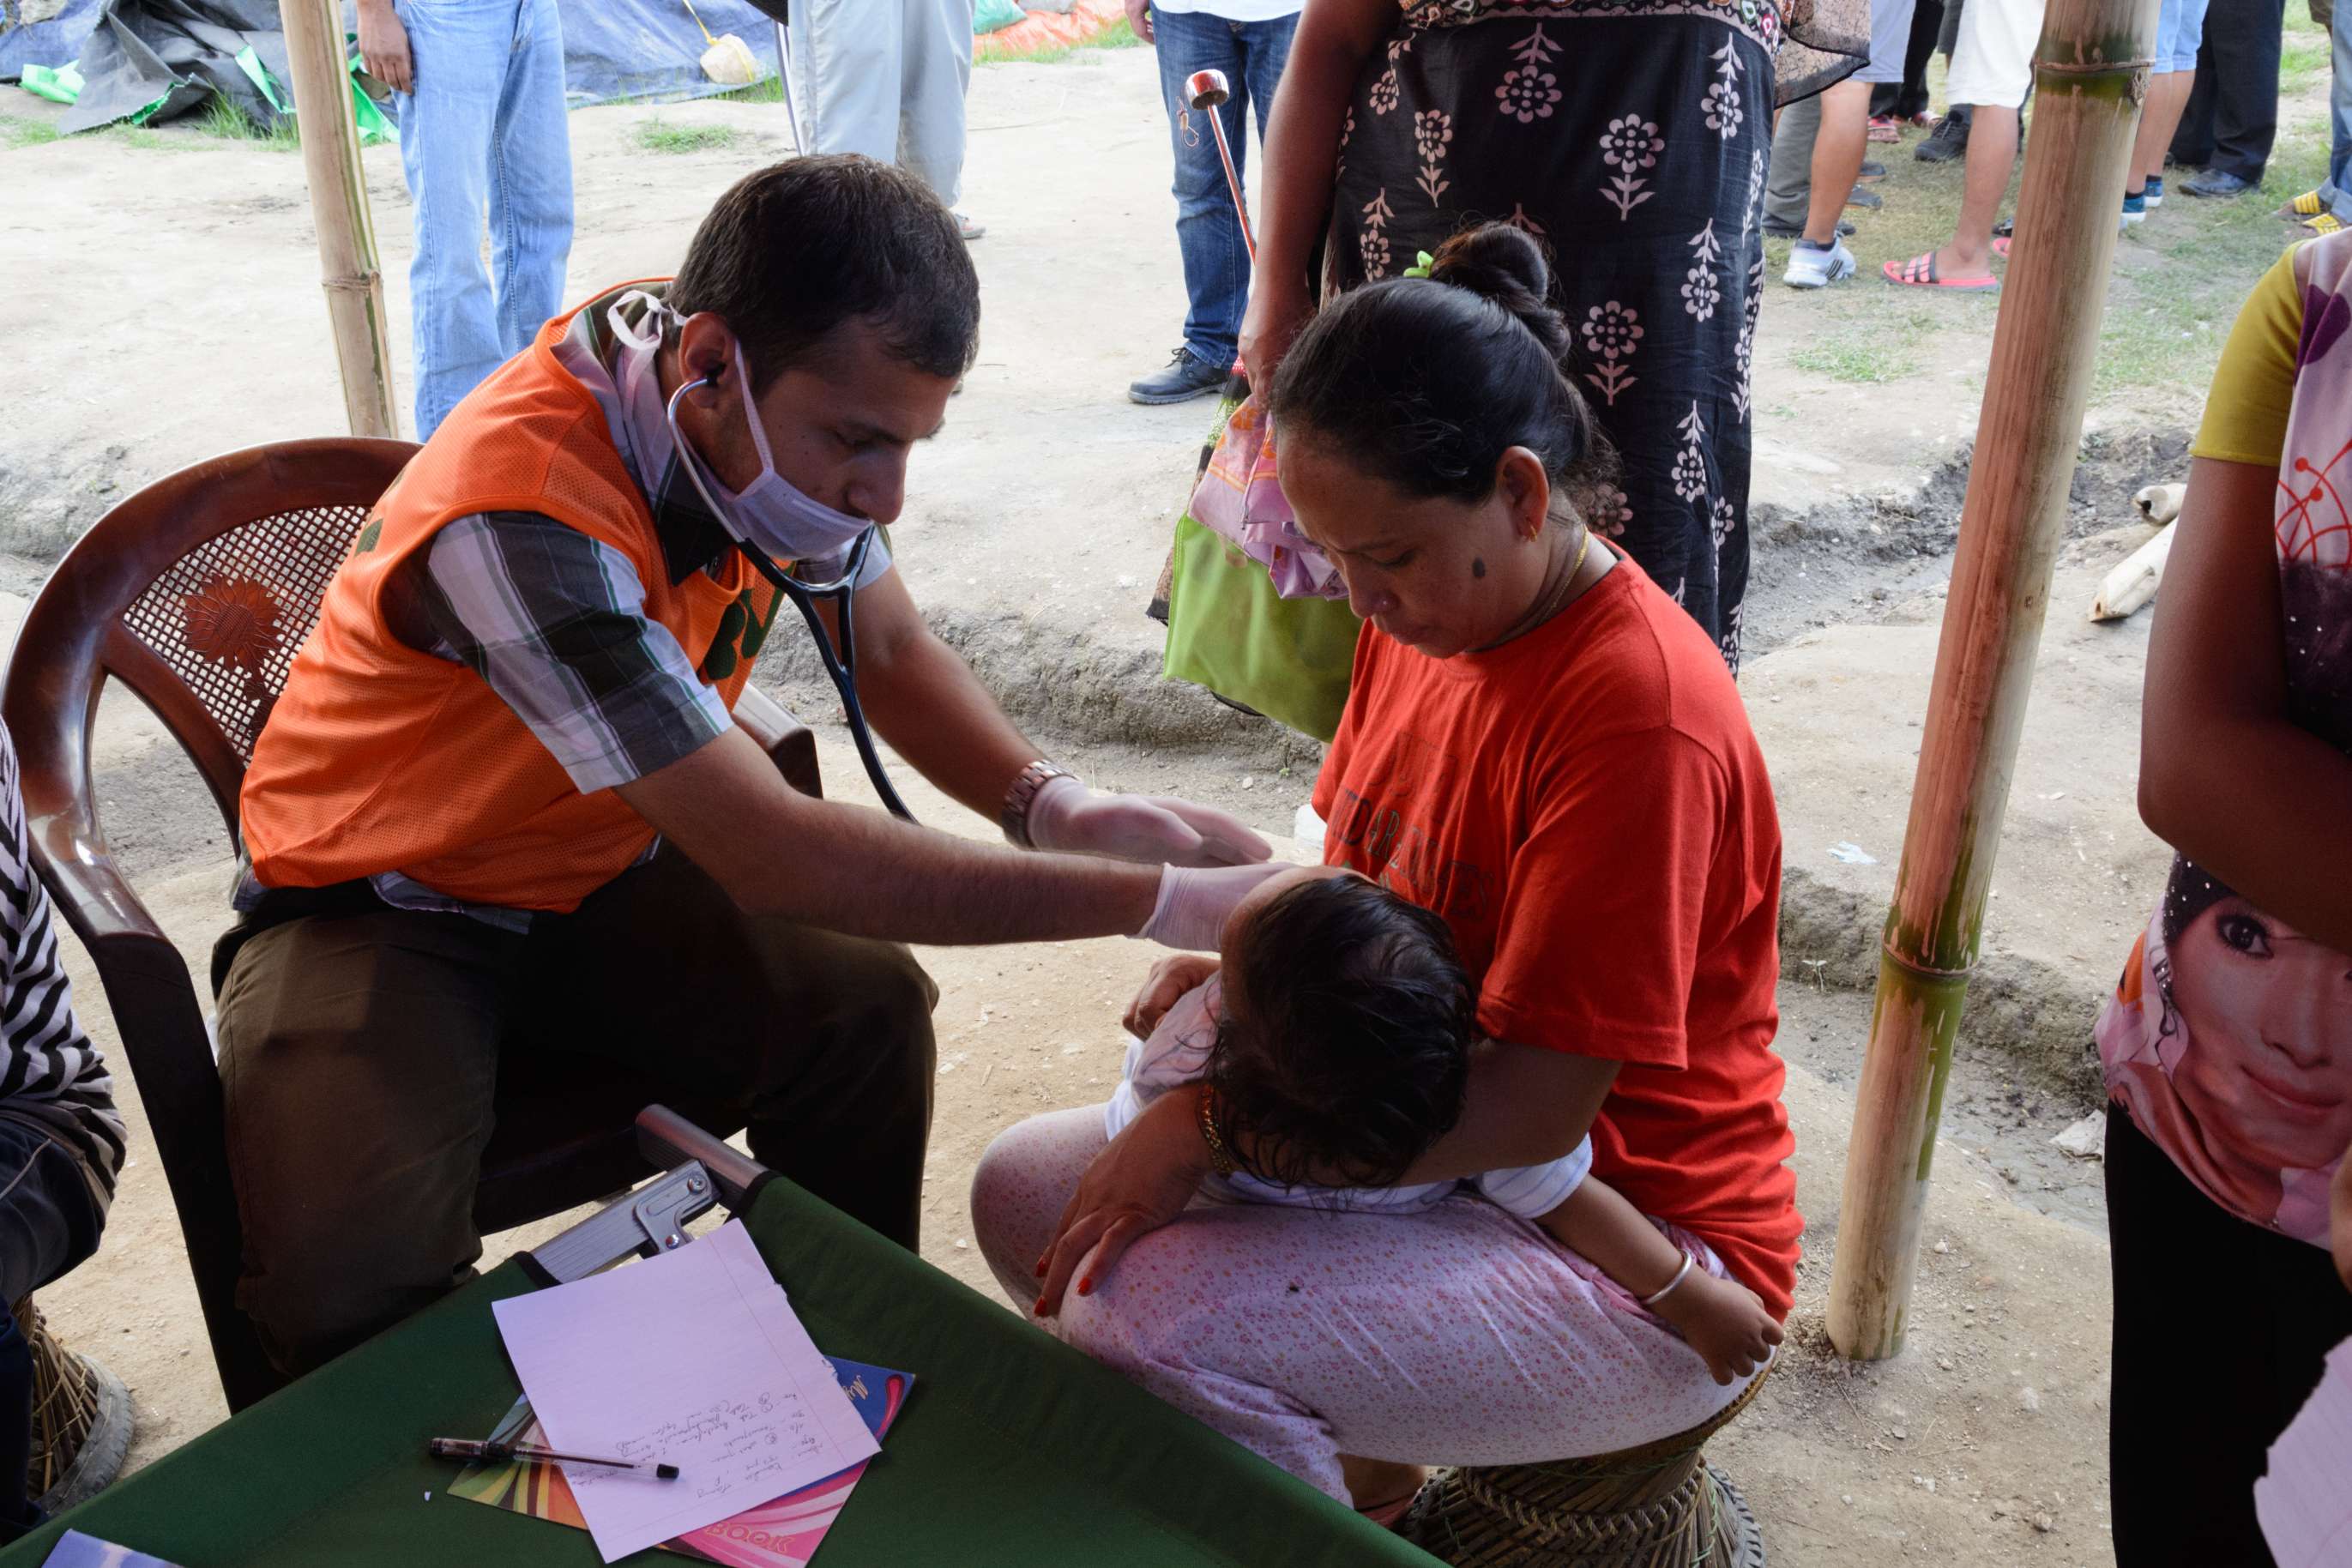 A doctor in an orange vest uses a stethoscope to examine a child held in the arms of a woman at an outdoor clinic.